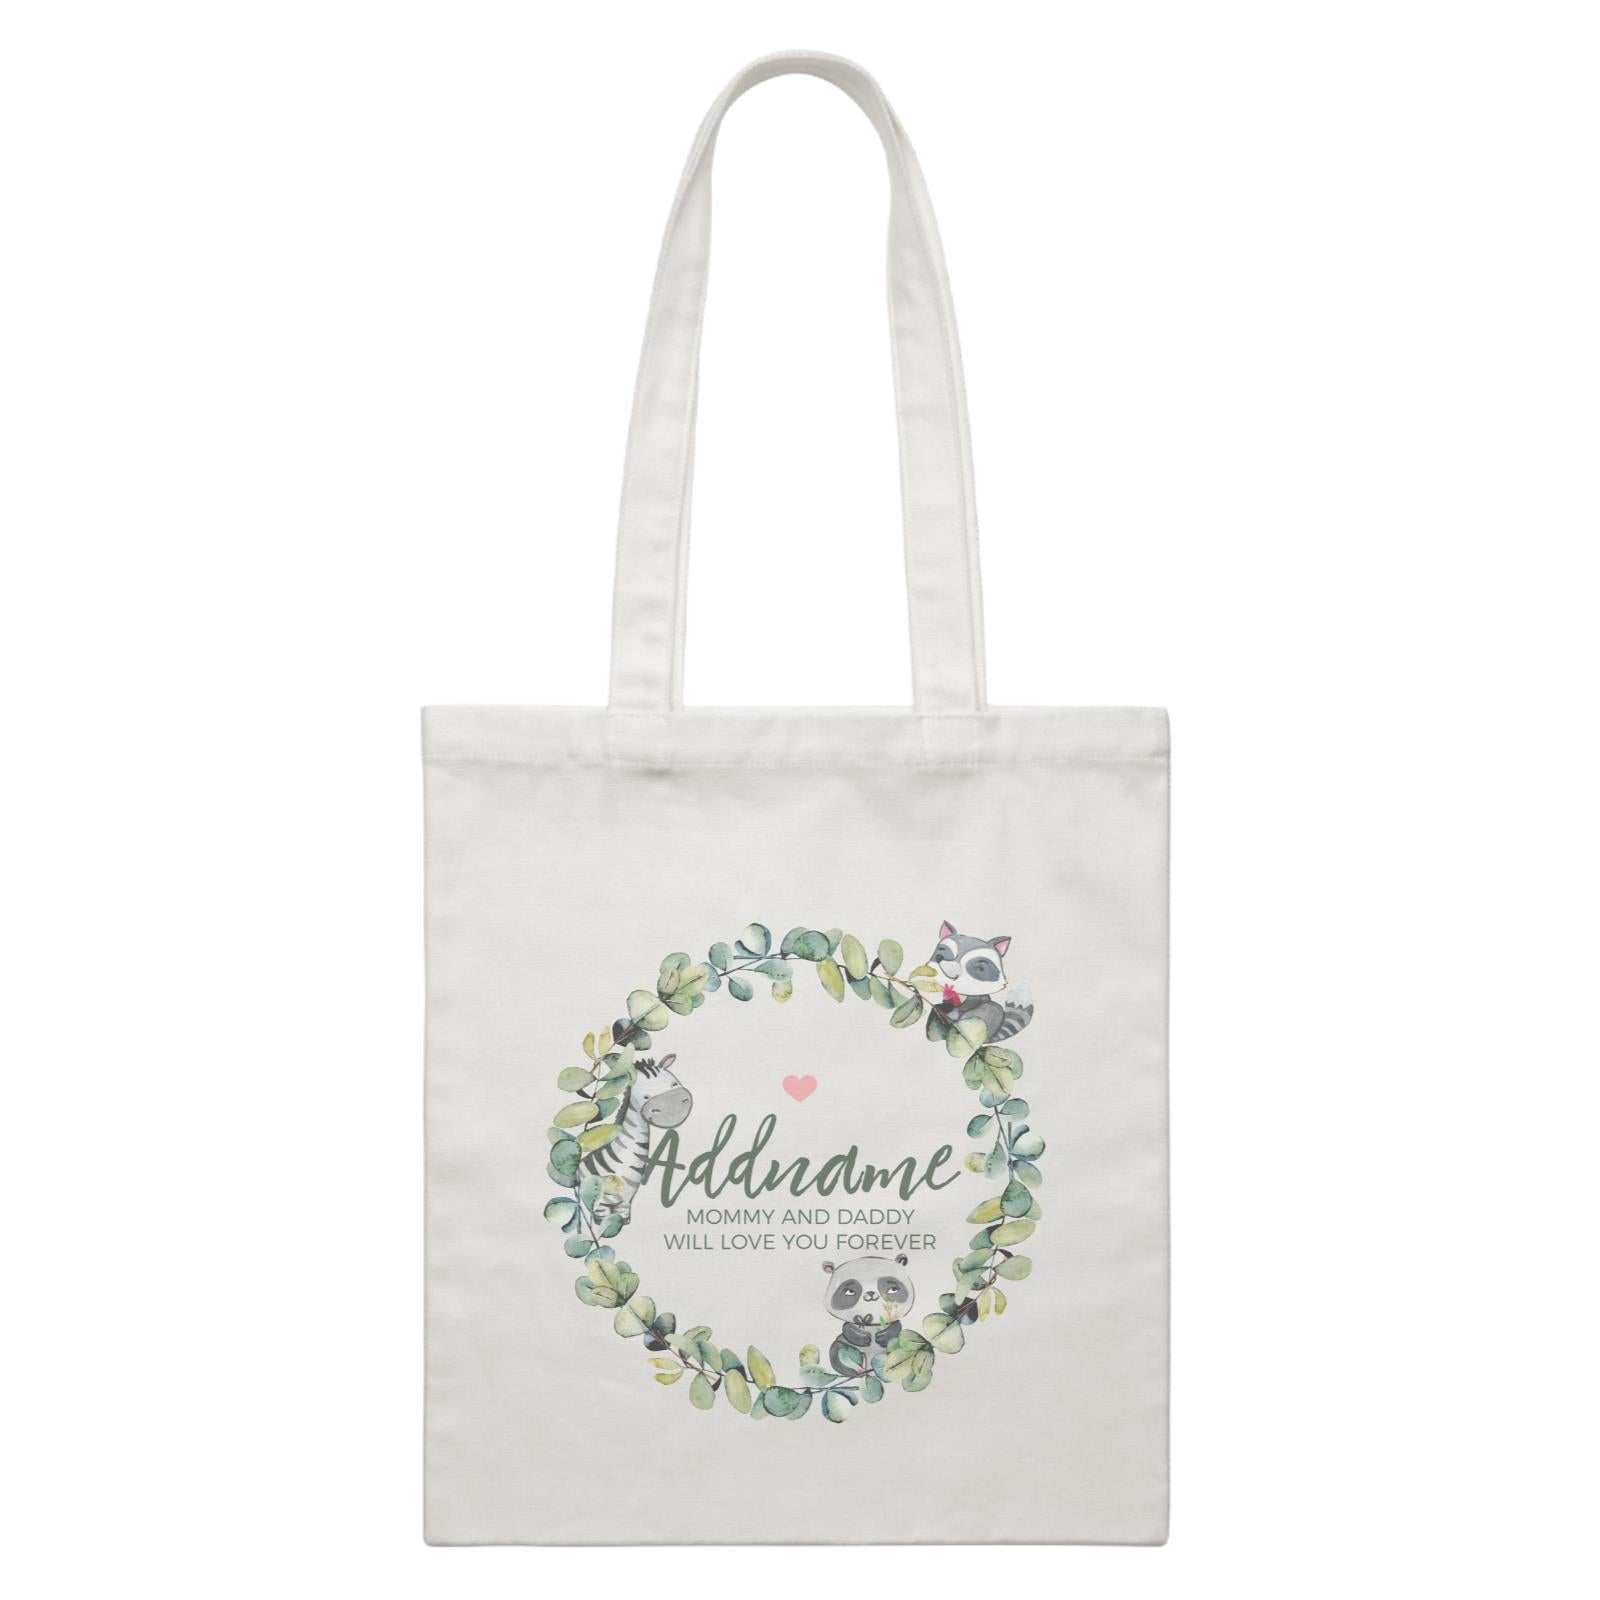 Watercolour Panda Zebra and Racoon Leaf Wreath Personalizable with Name and Text White Canvas Bag